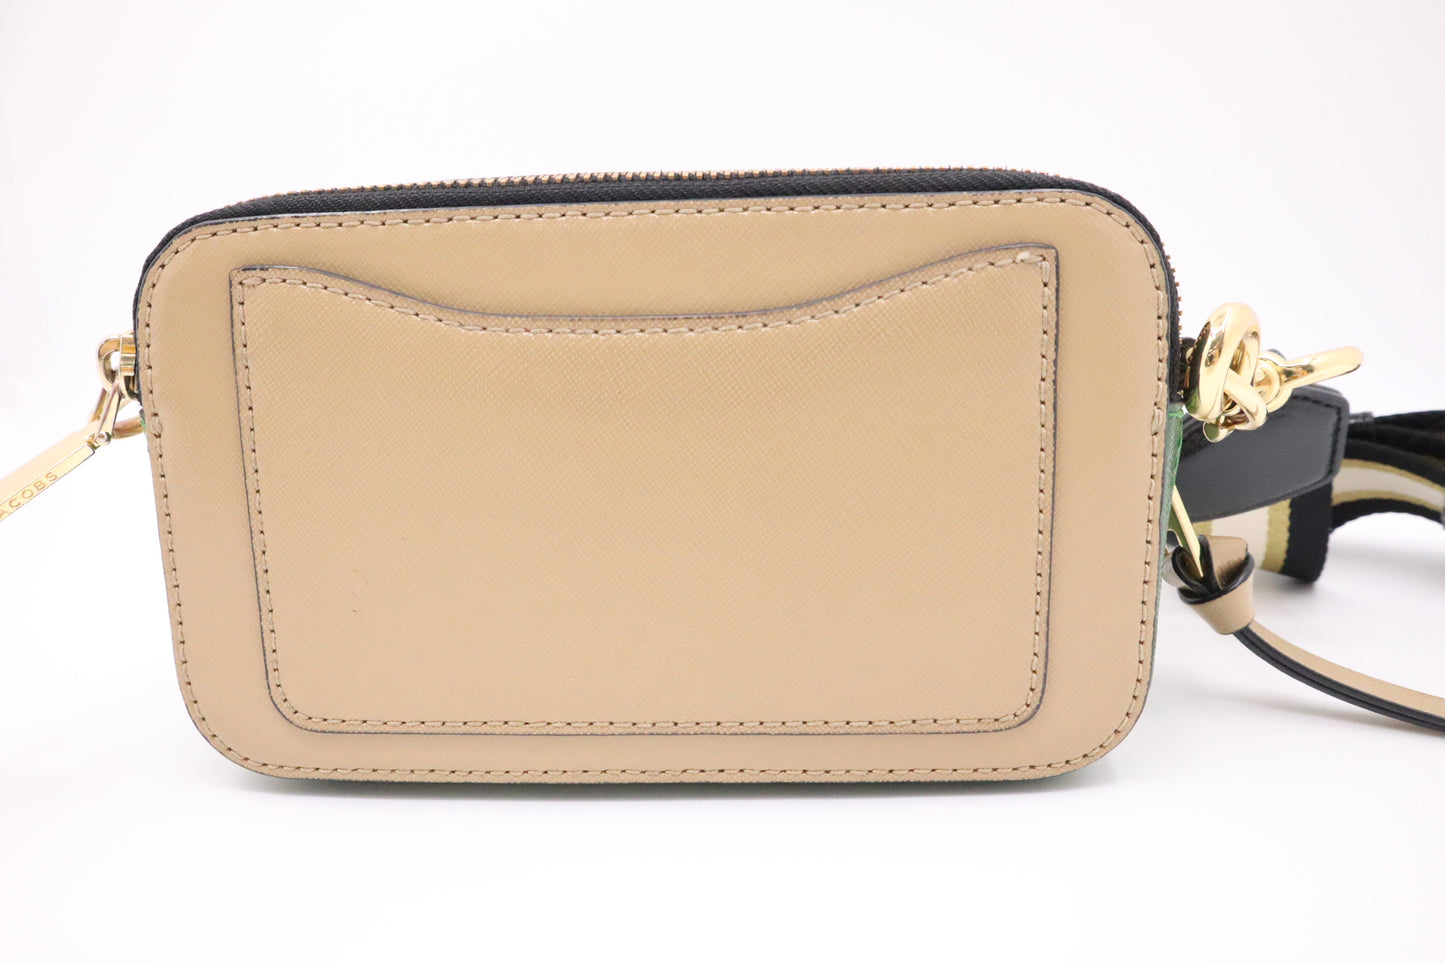 Marc Jacobs Snapshot in Tan, White and Green Leather